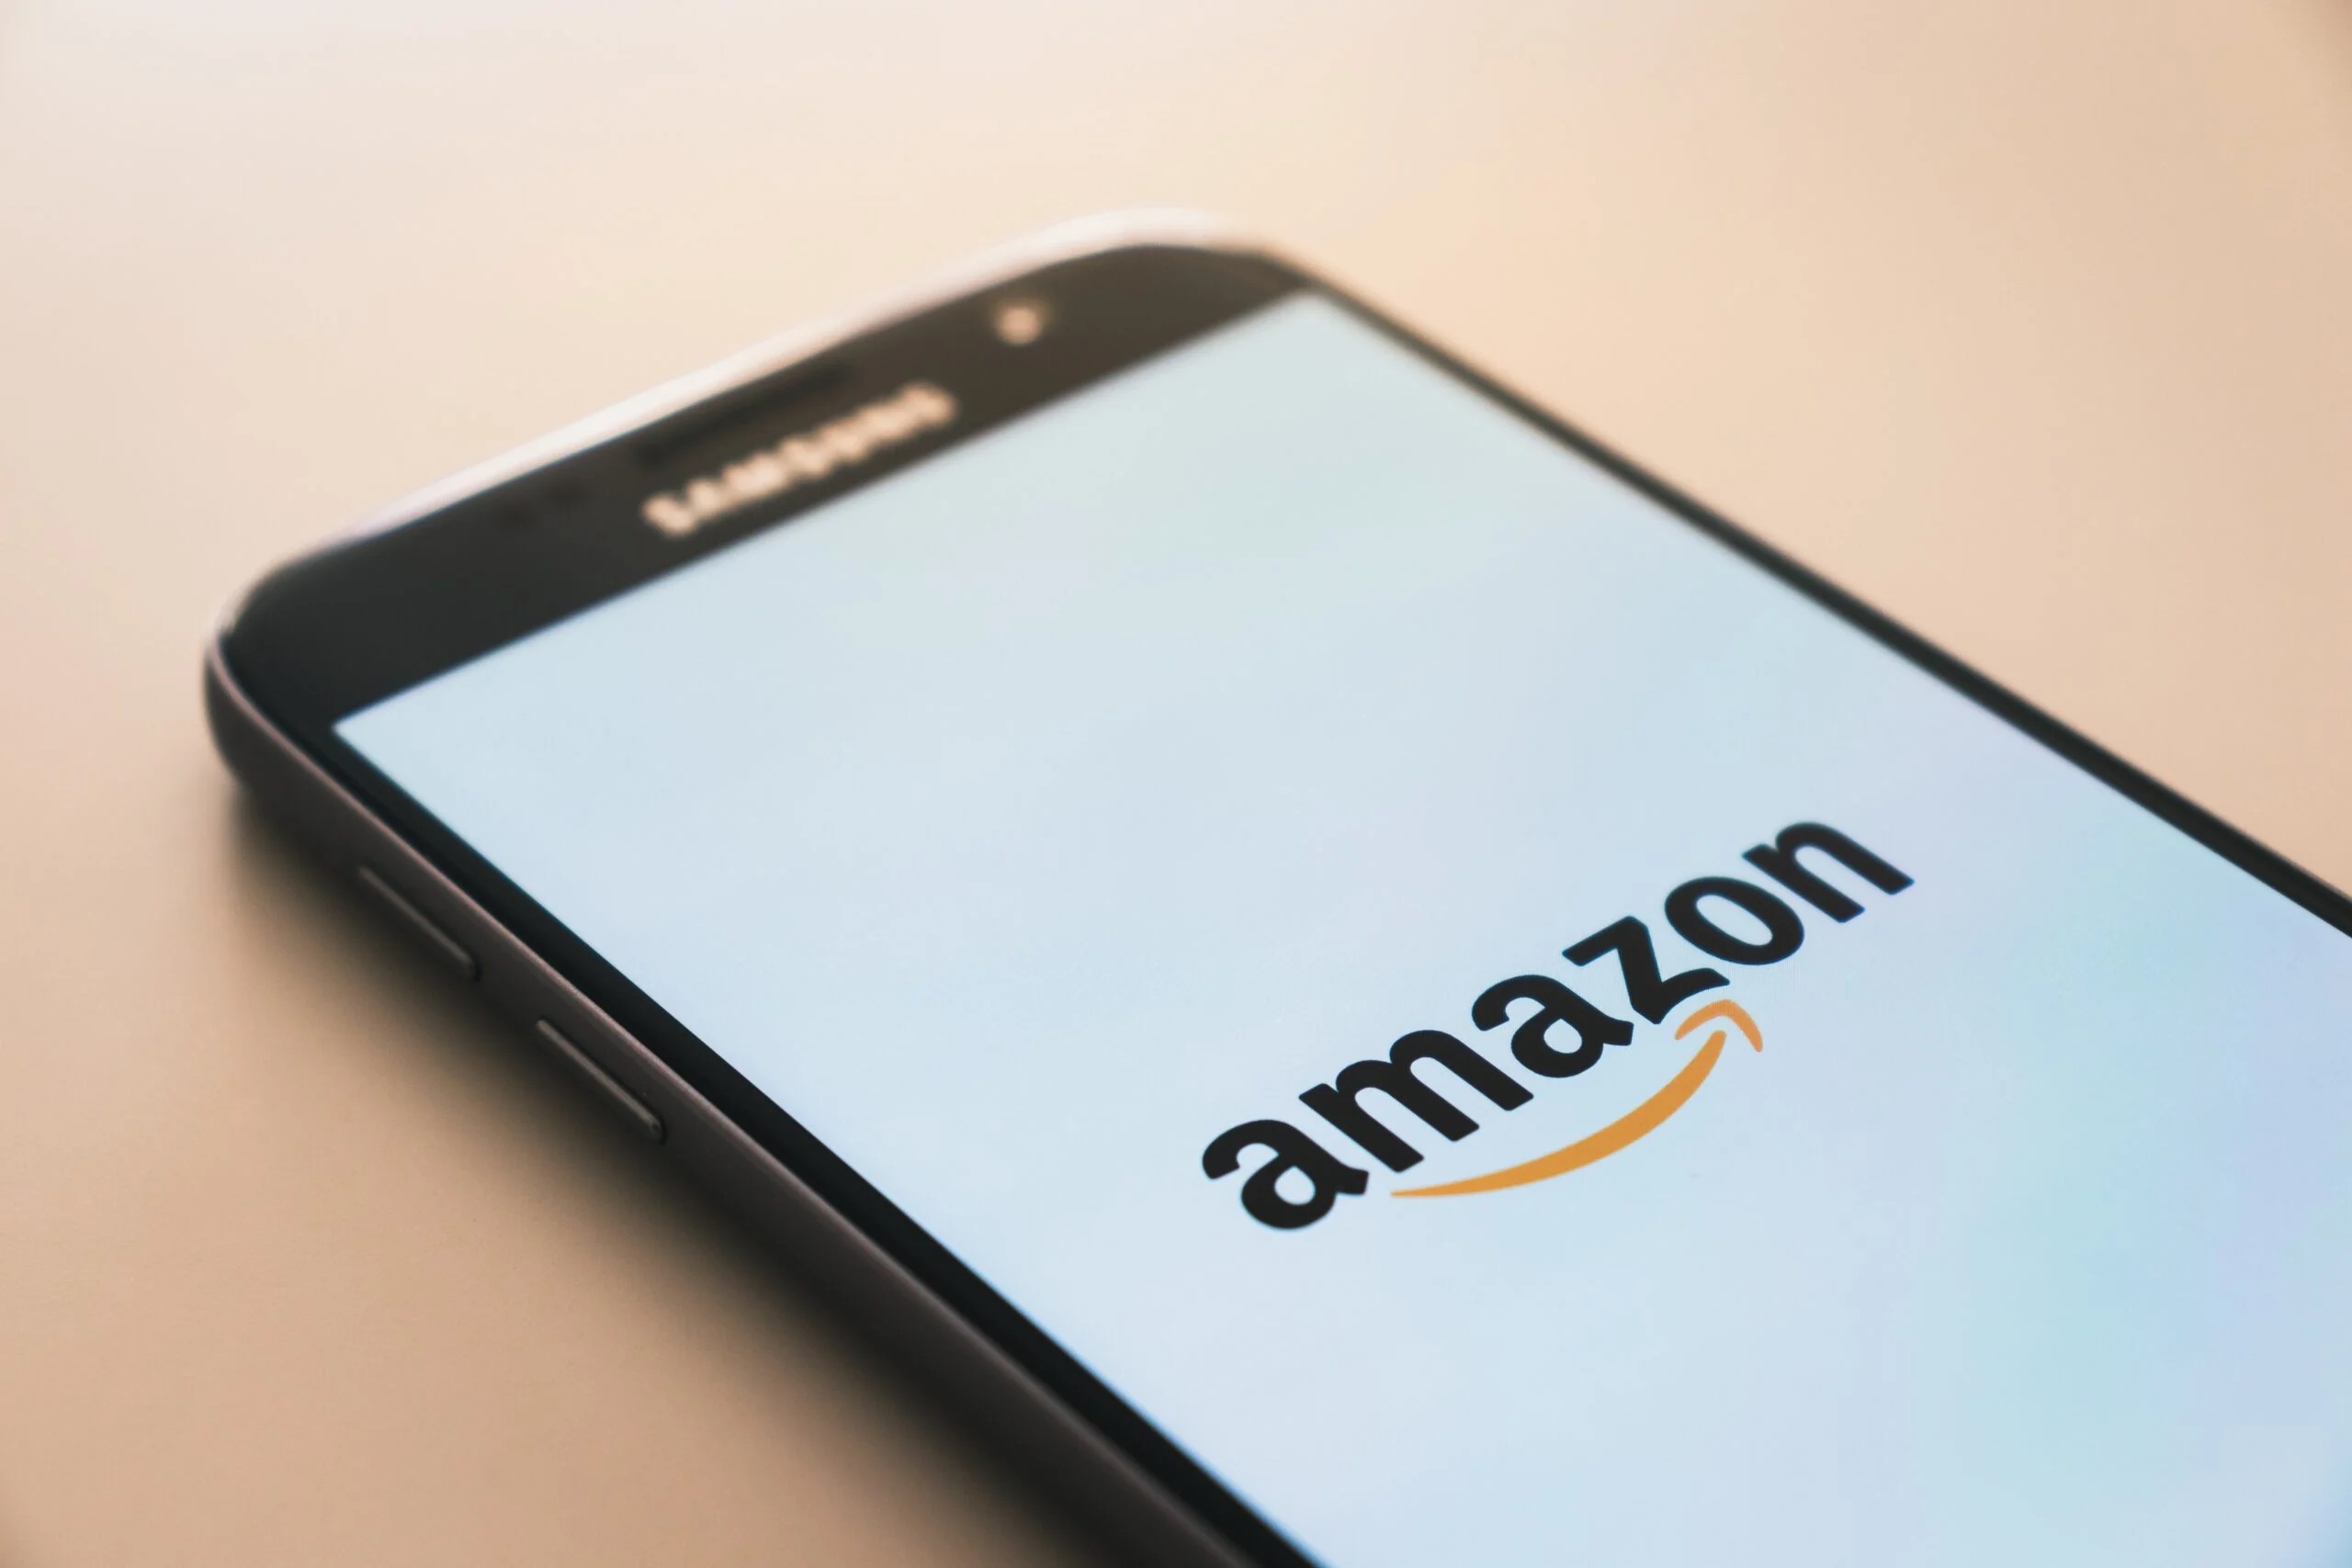 AMAZON NOW OFFERS SAME-DAY DELIVERY FOR SOME RETAILERS